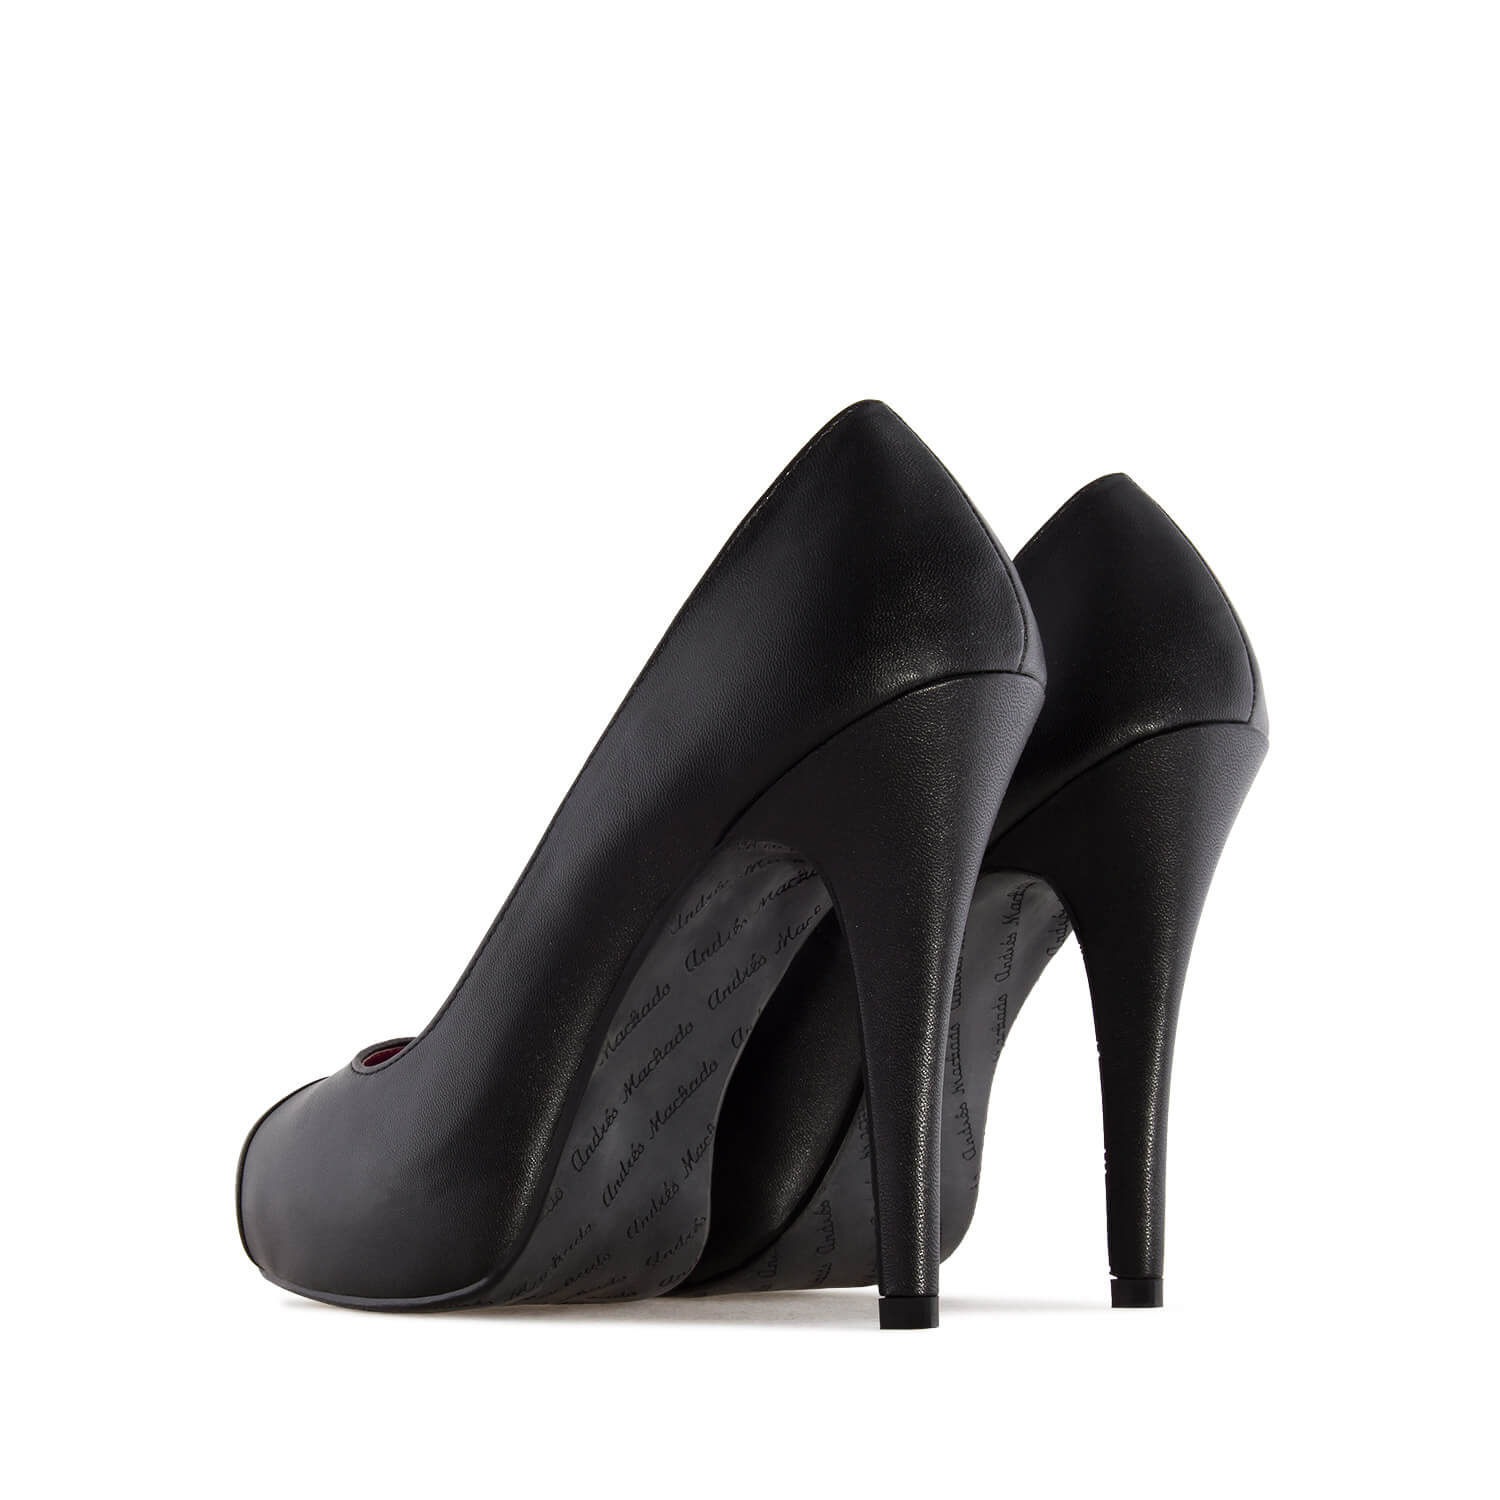 Black Faux Leather Peep Toe Pumps with inner Platform and Stiletto Heel 